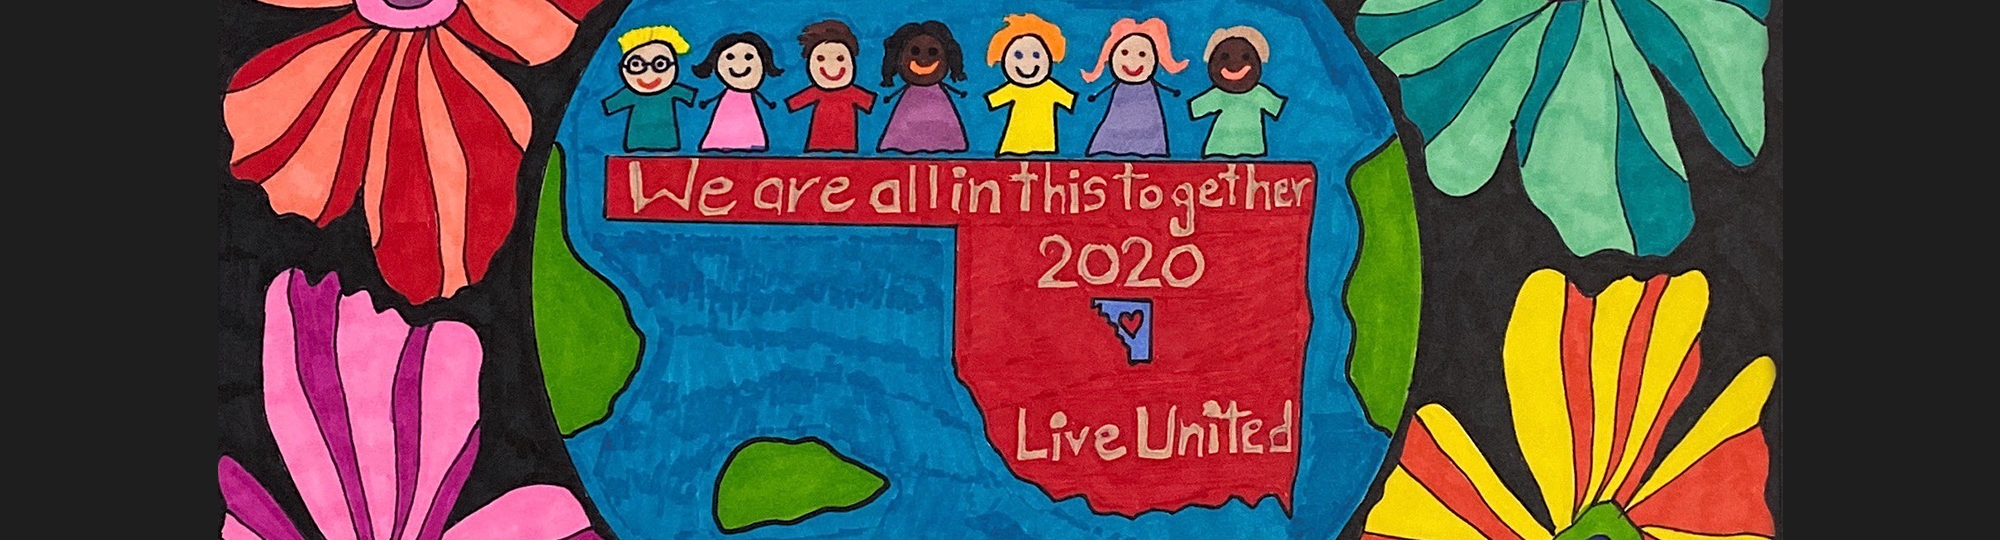 United Way Poster Contest